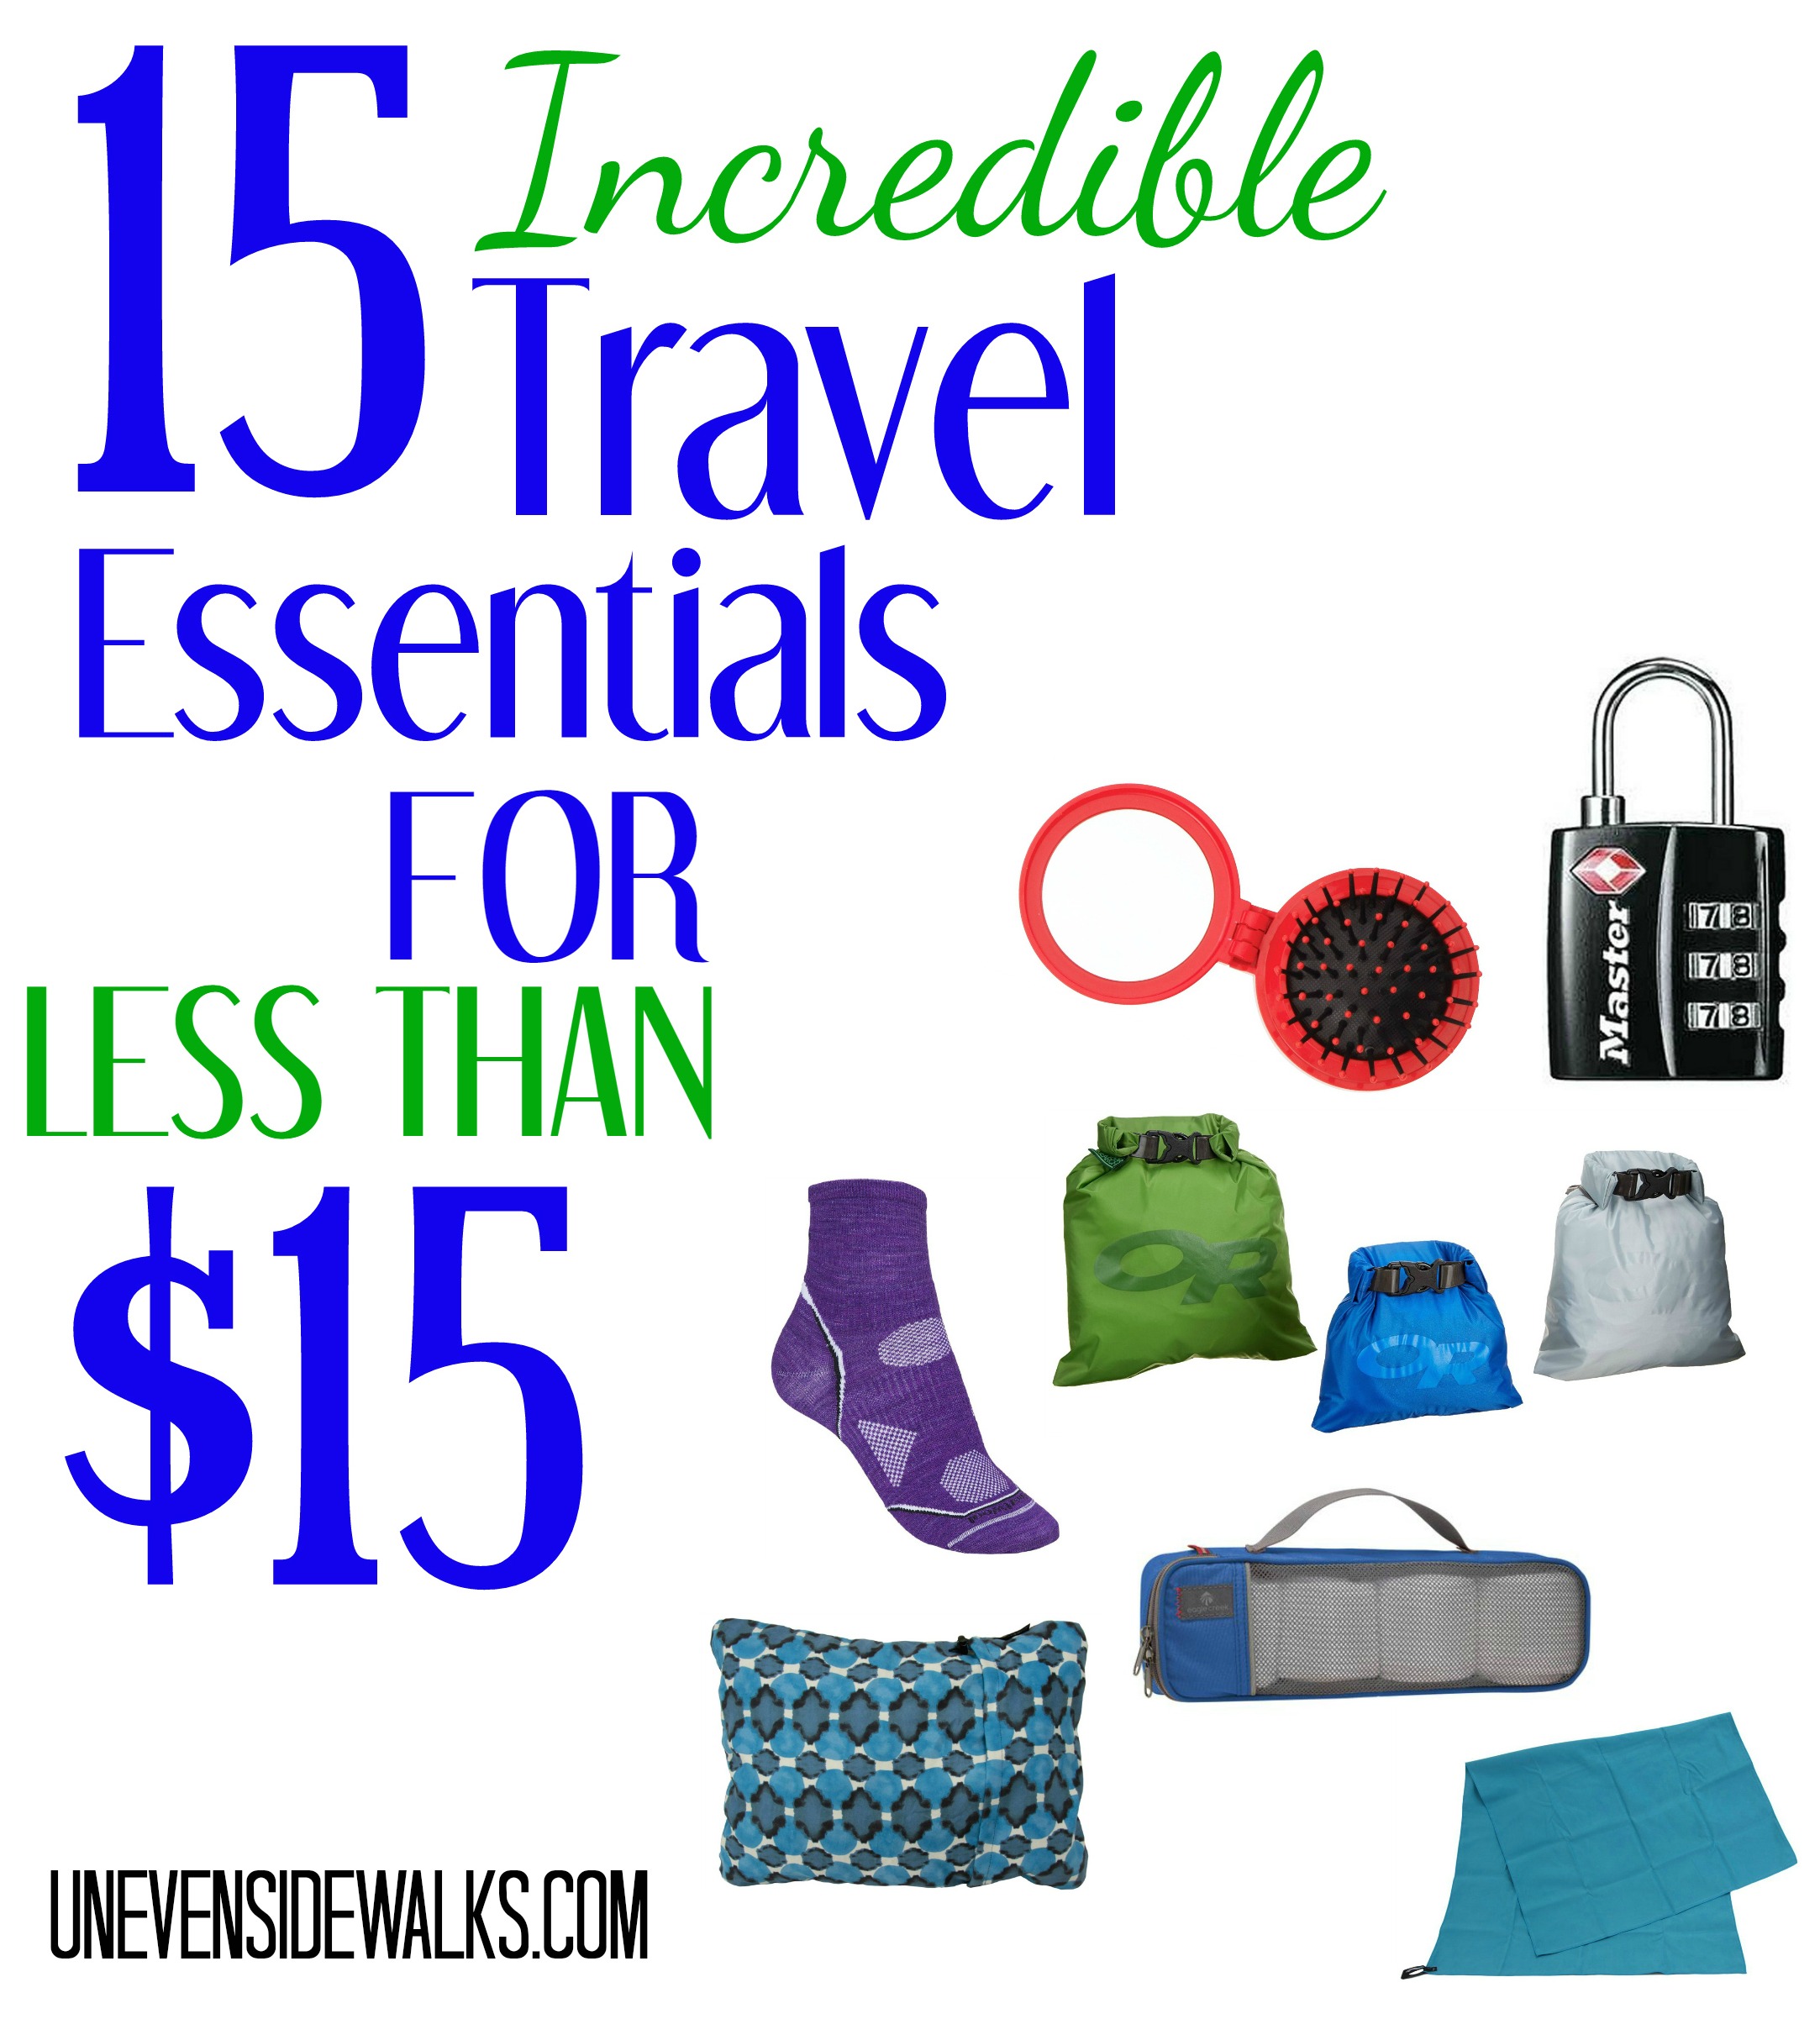 15 Travel Essentials for Less than $15